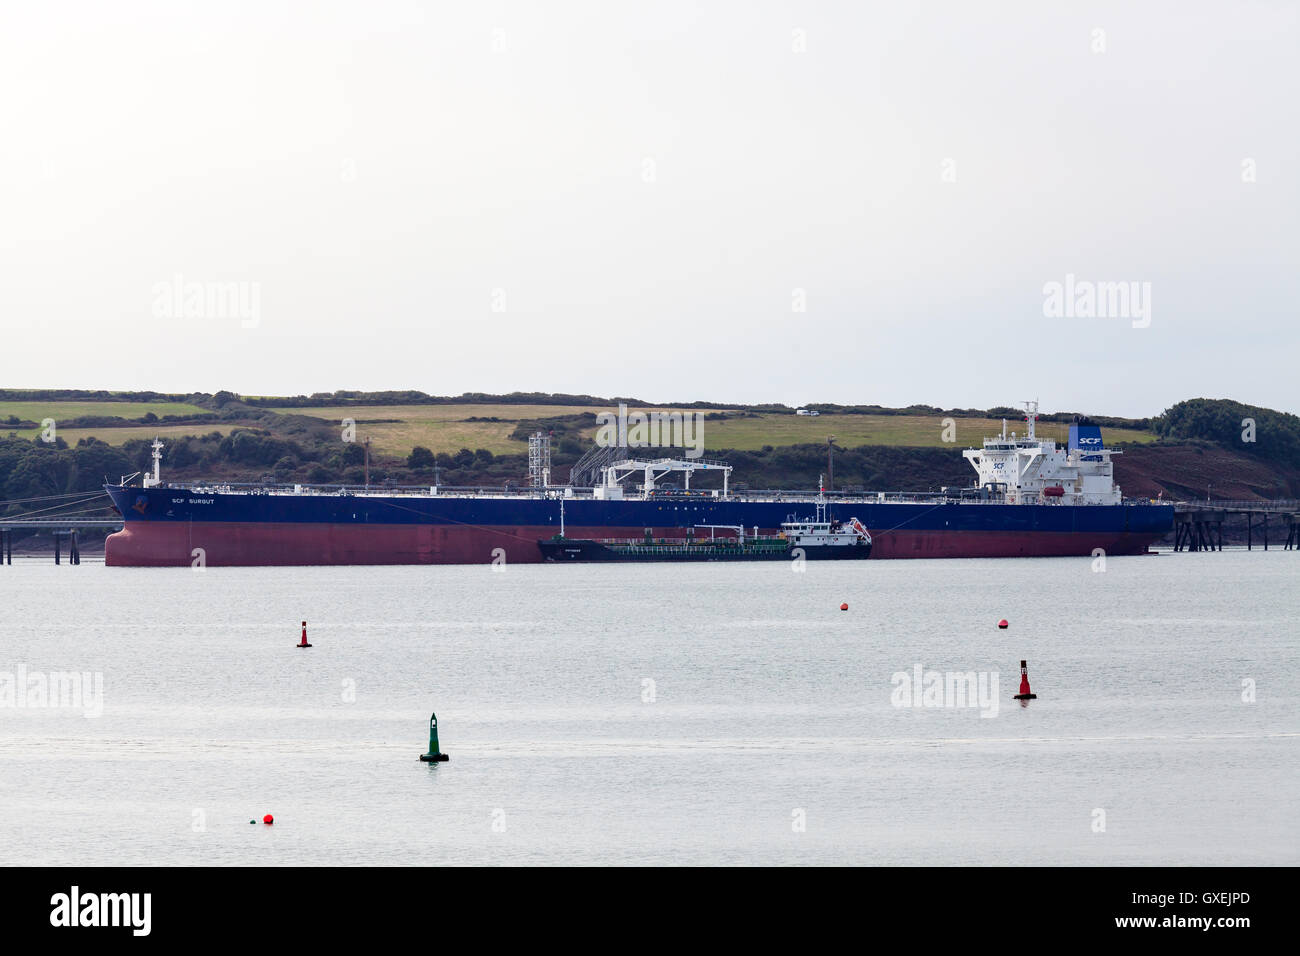 Oil tanker at Milford Haven, Pembrokeshire, Wales. Stock Photo